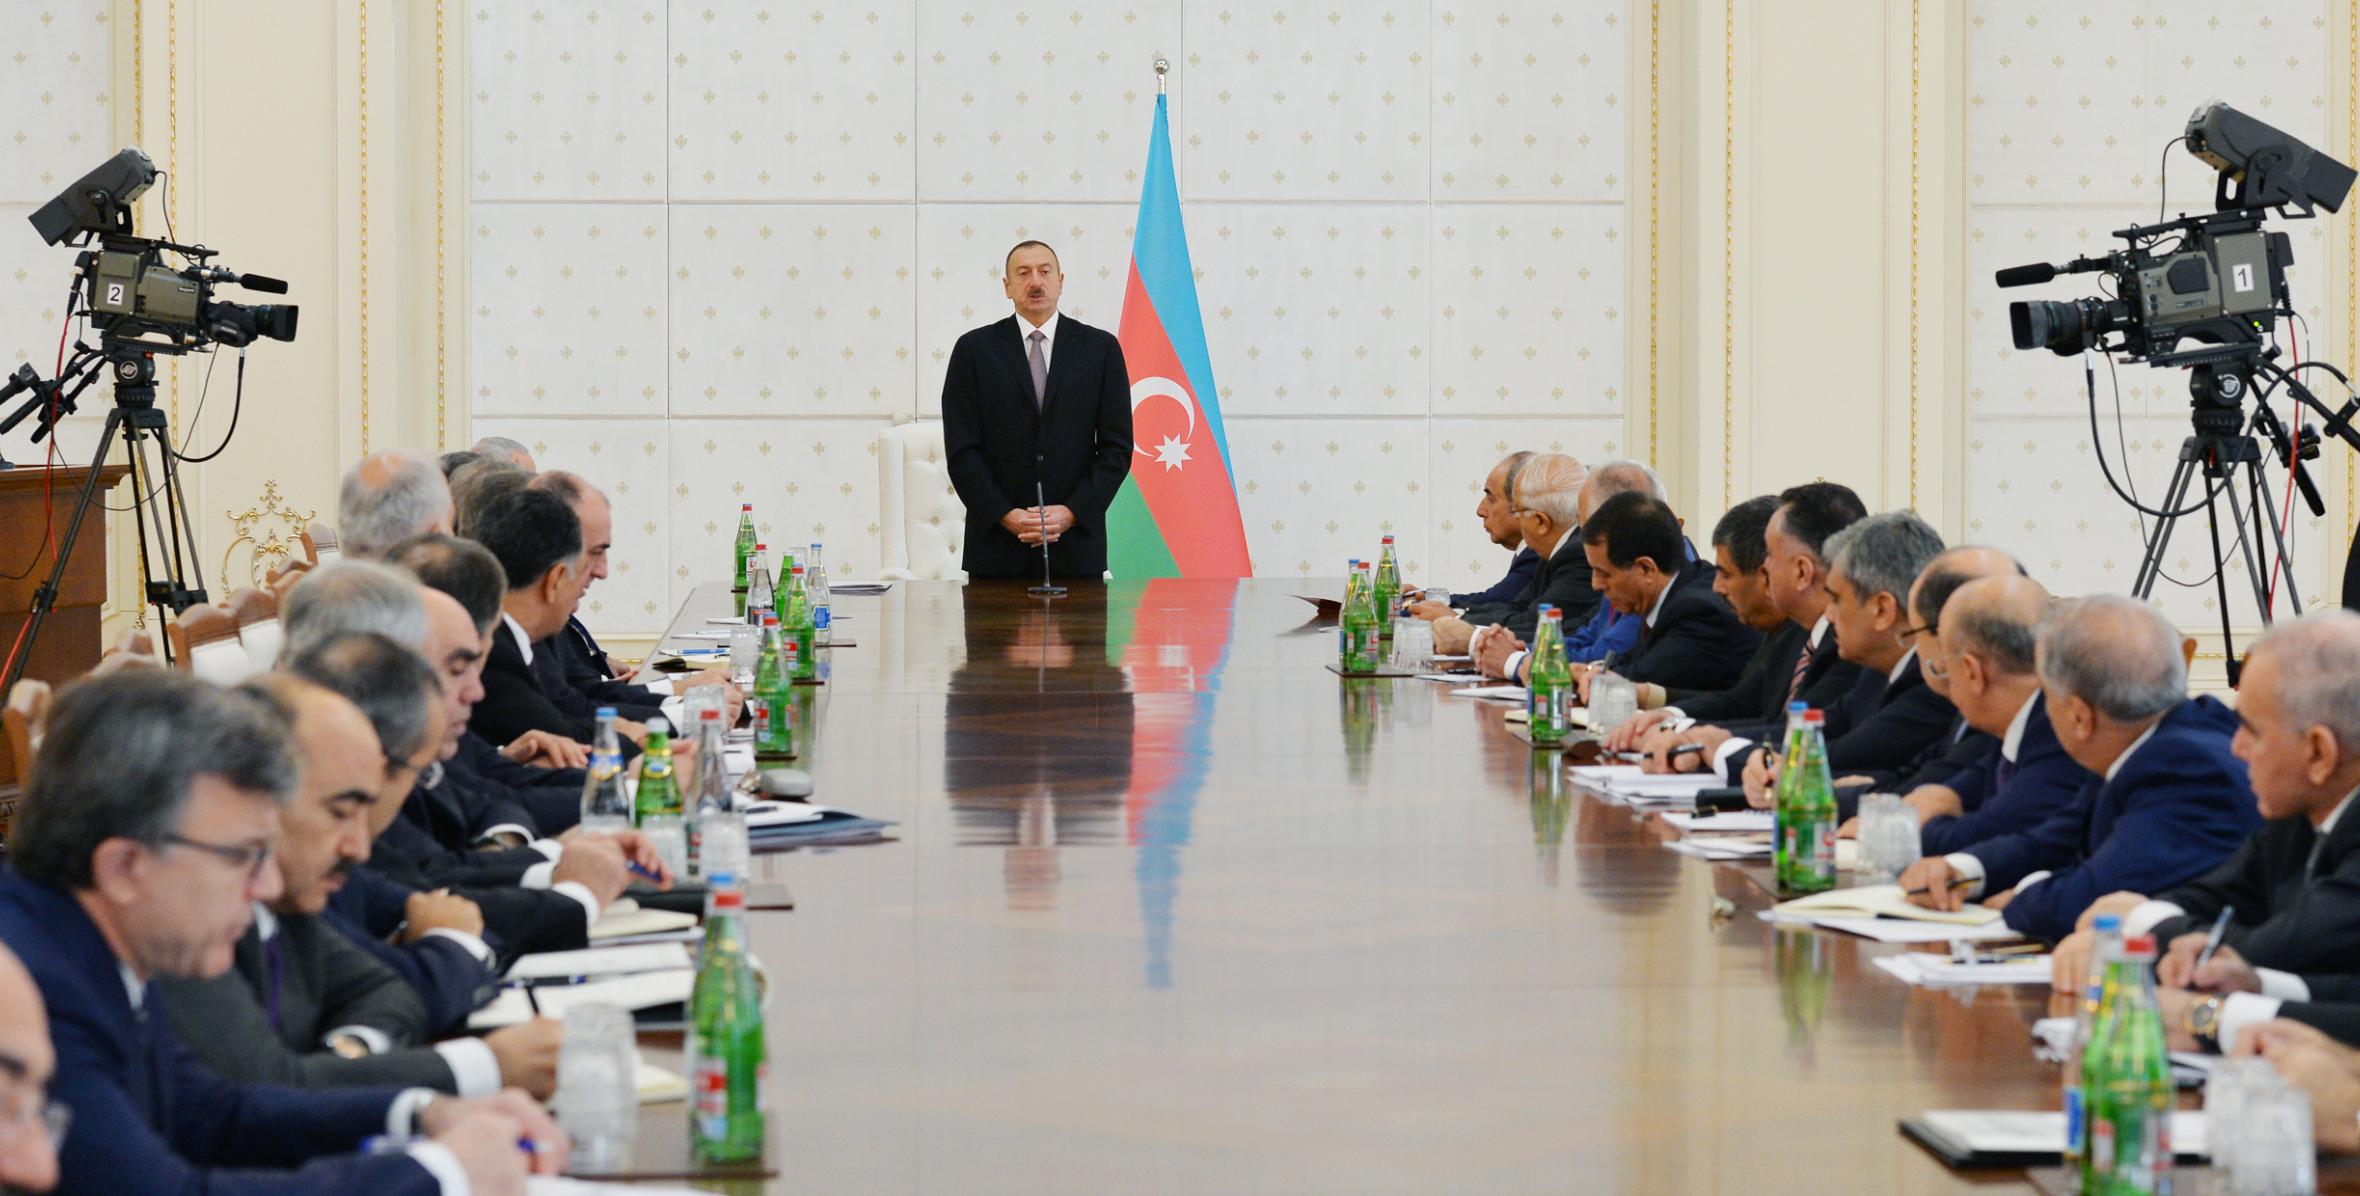 Ilham Aliyev chaired the meeting of the Cabinet of Ministers dedicated to the results of socioeconomic development in nine months of 2015 and objectives for the future